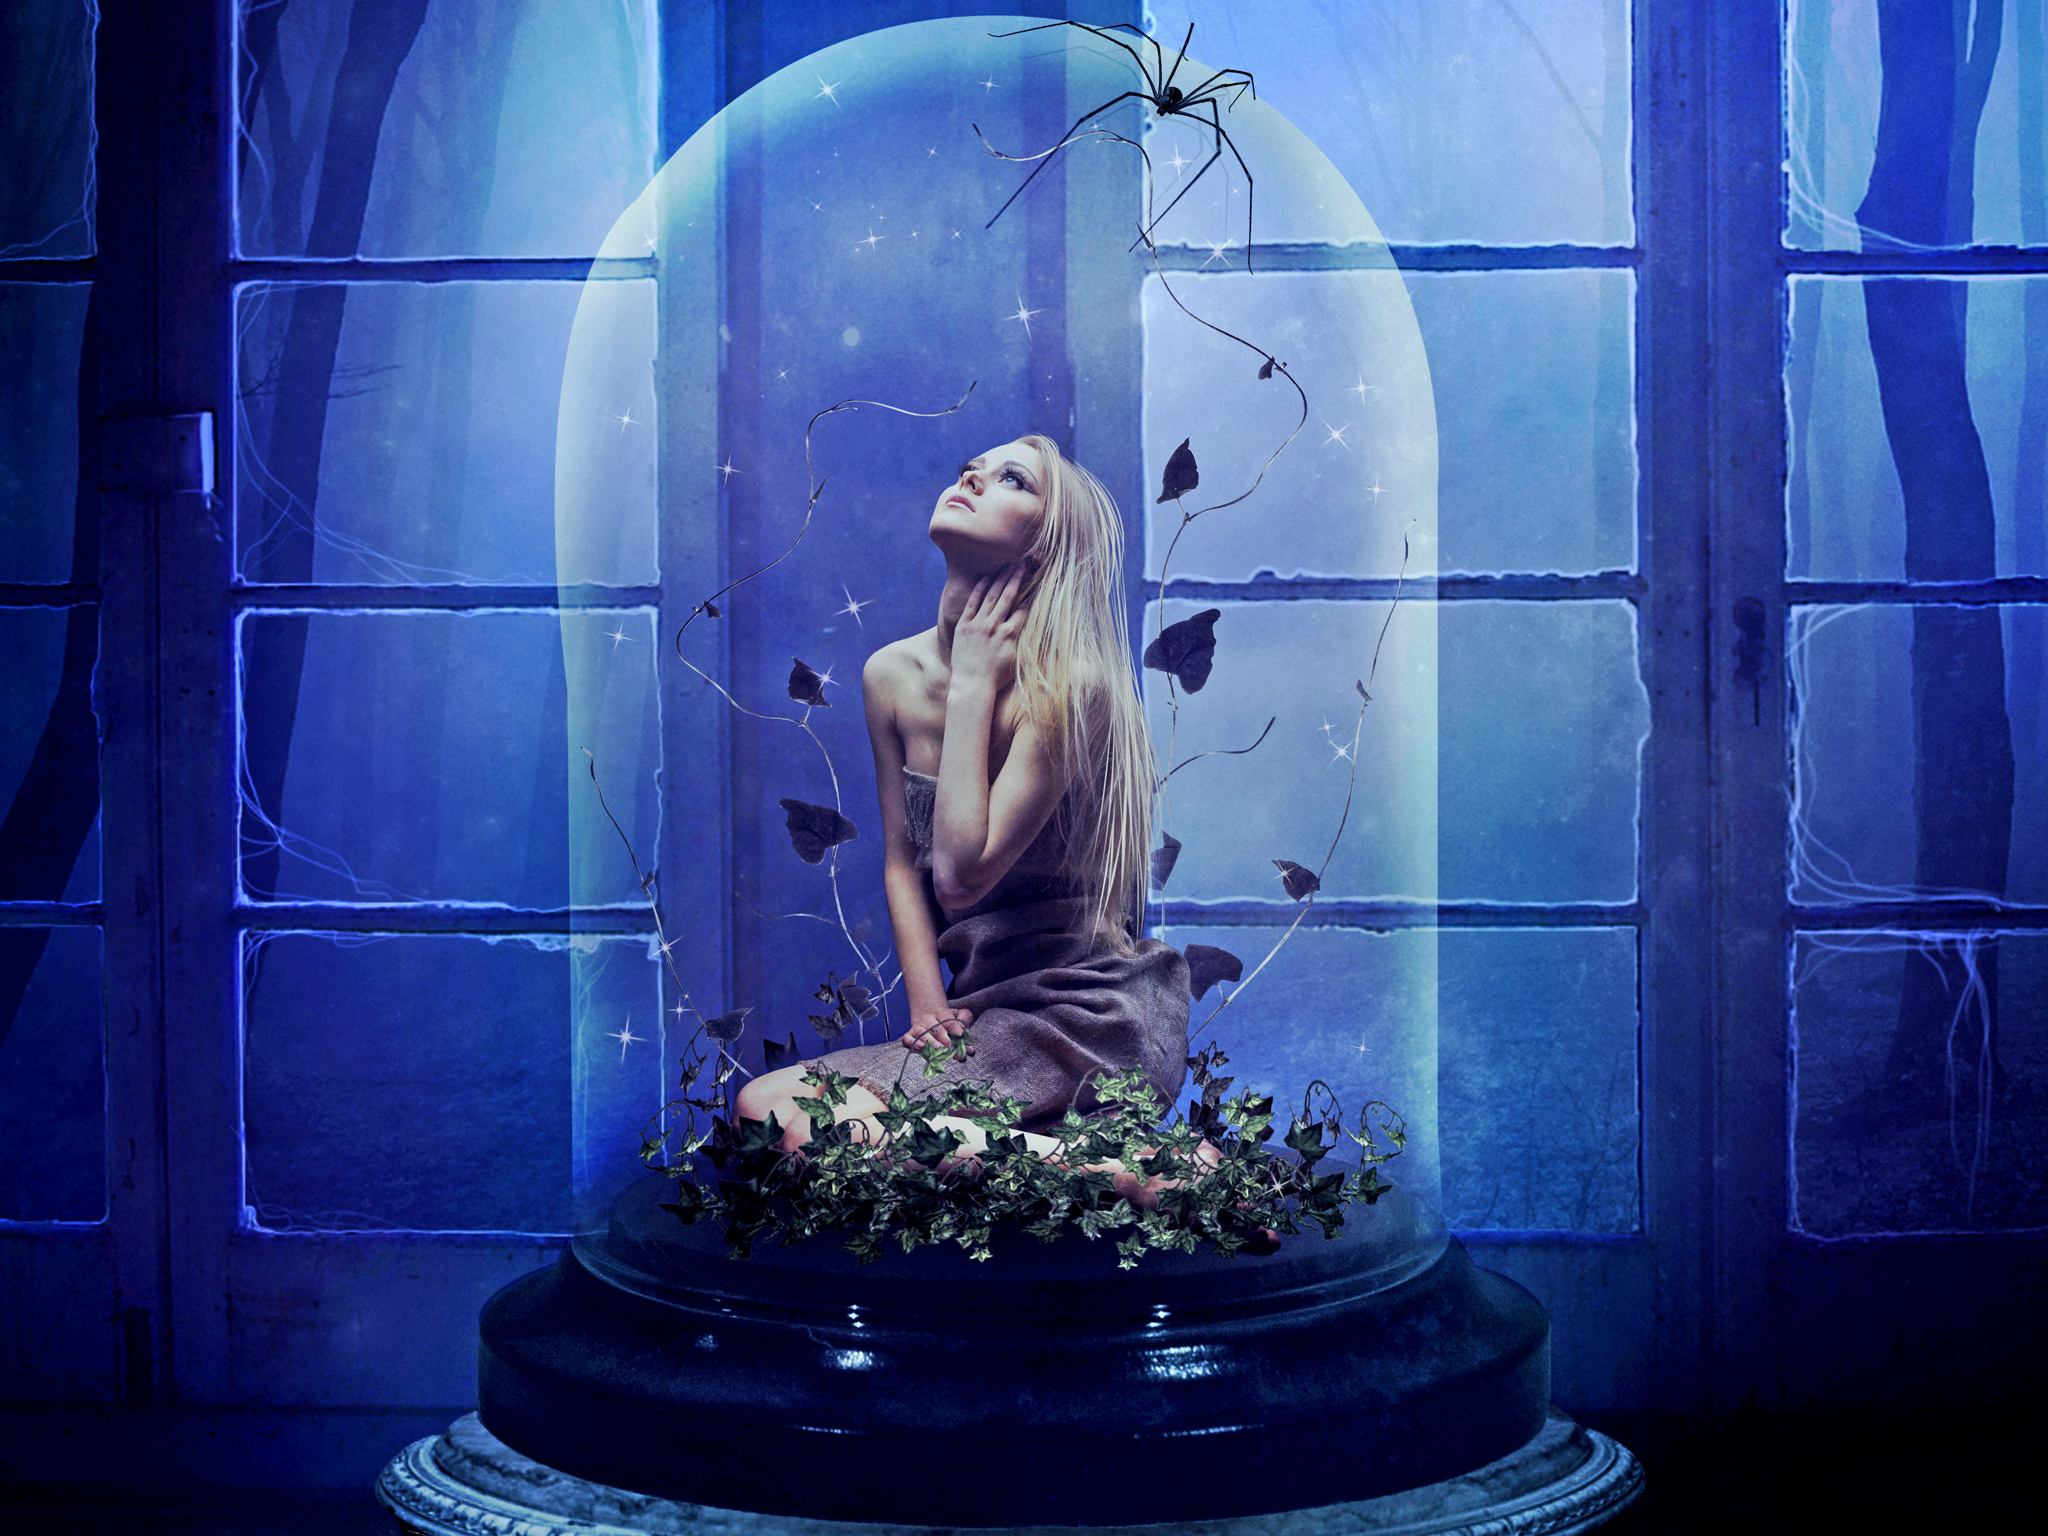 Girl Under Glass Dome by Kryseis